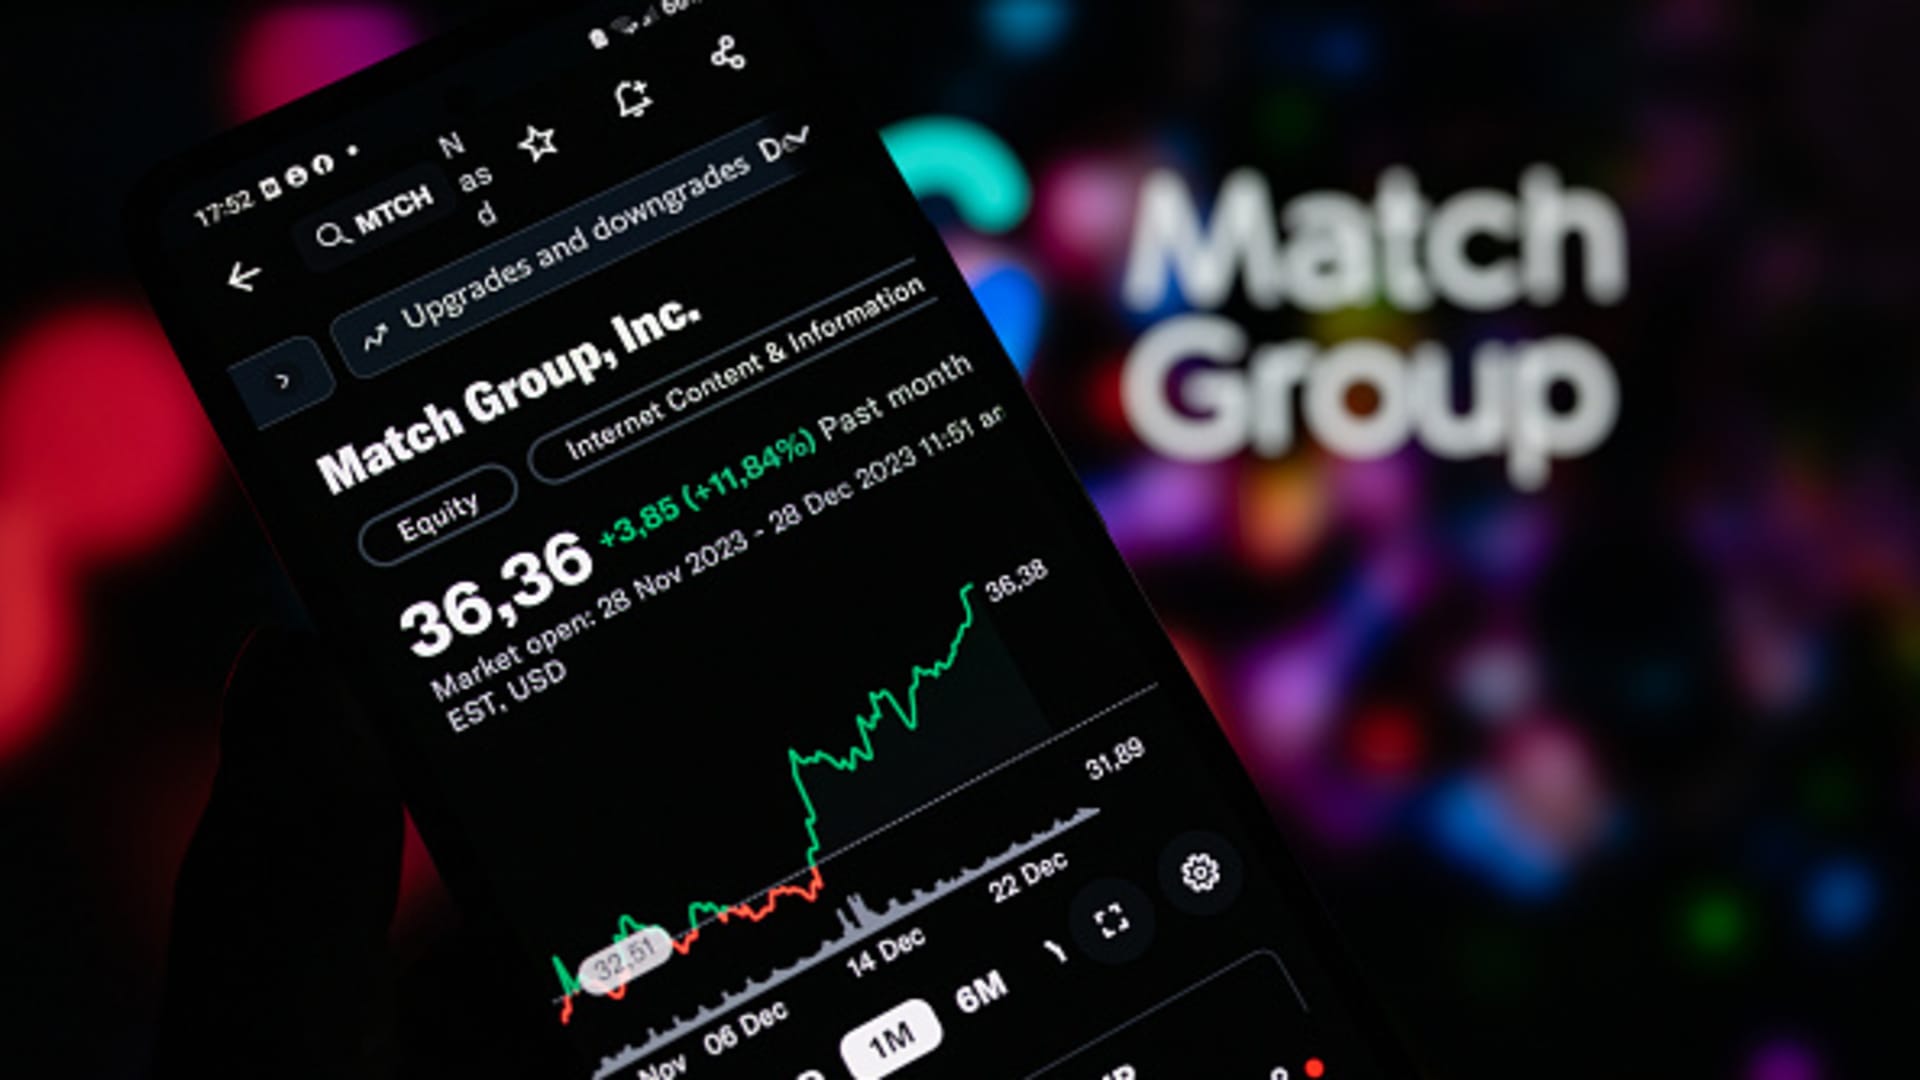 Match adds two directors in deal with activist investor Elliott Management